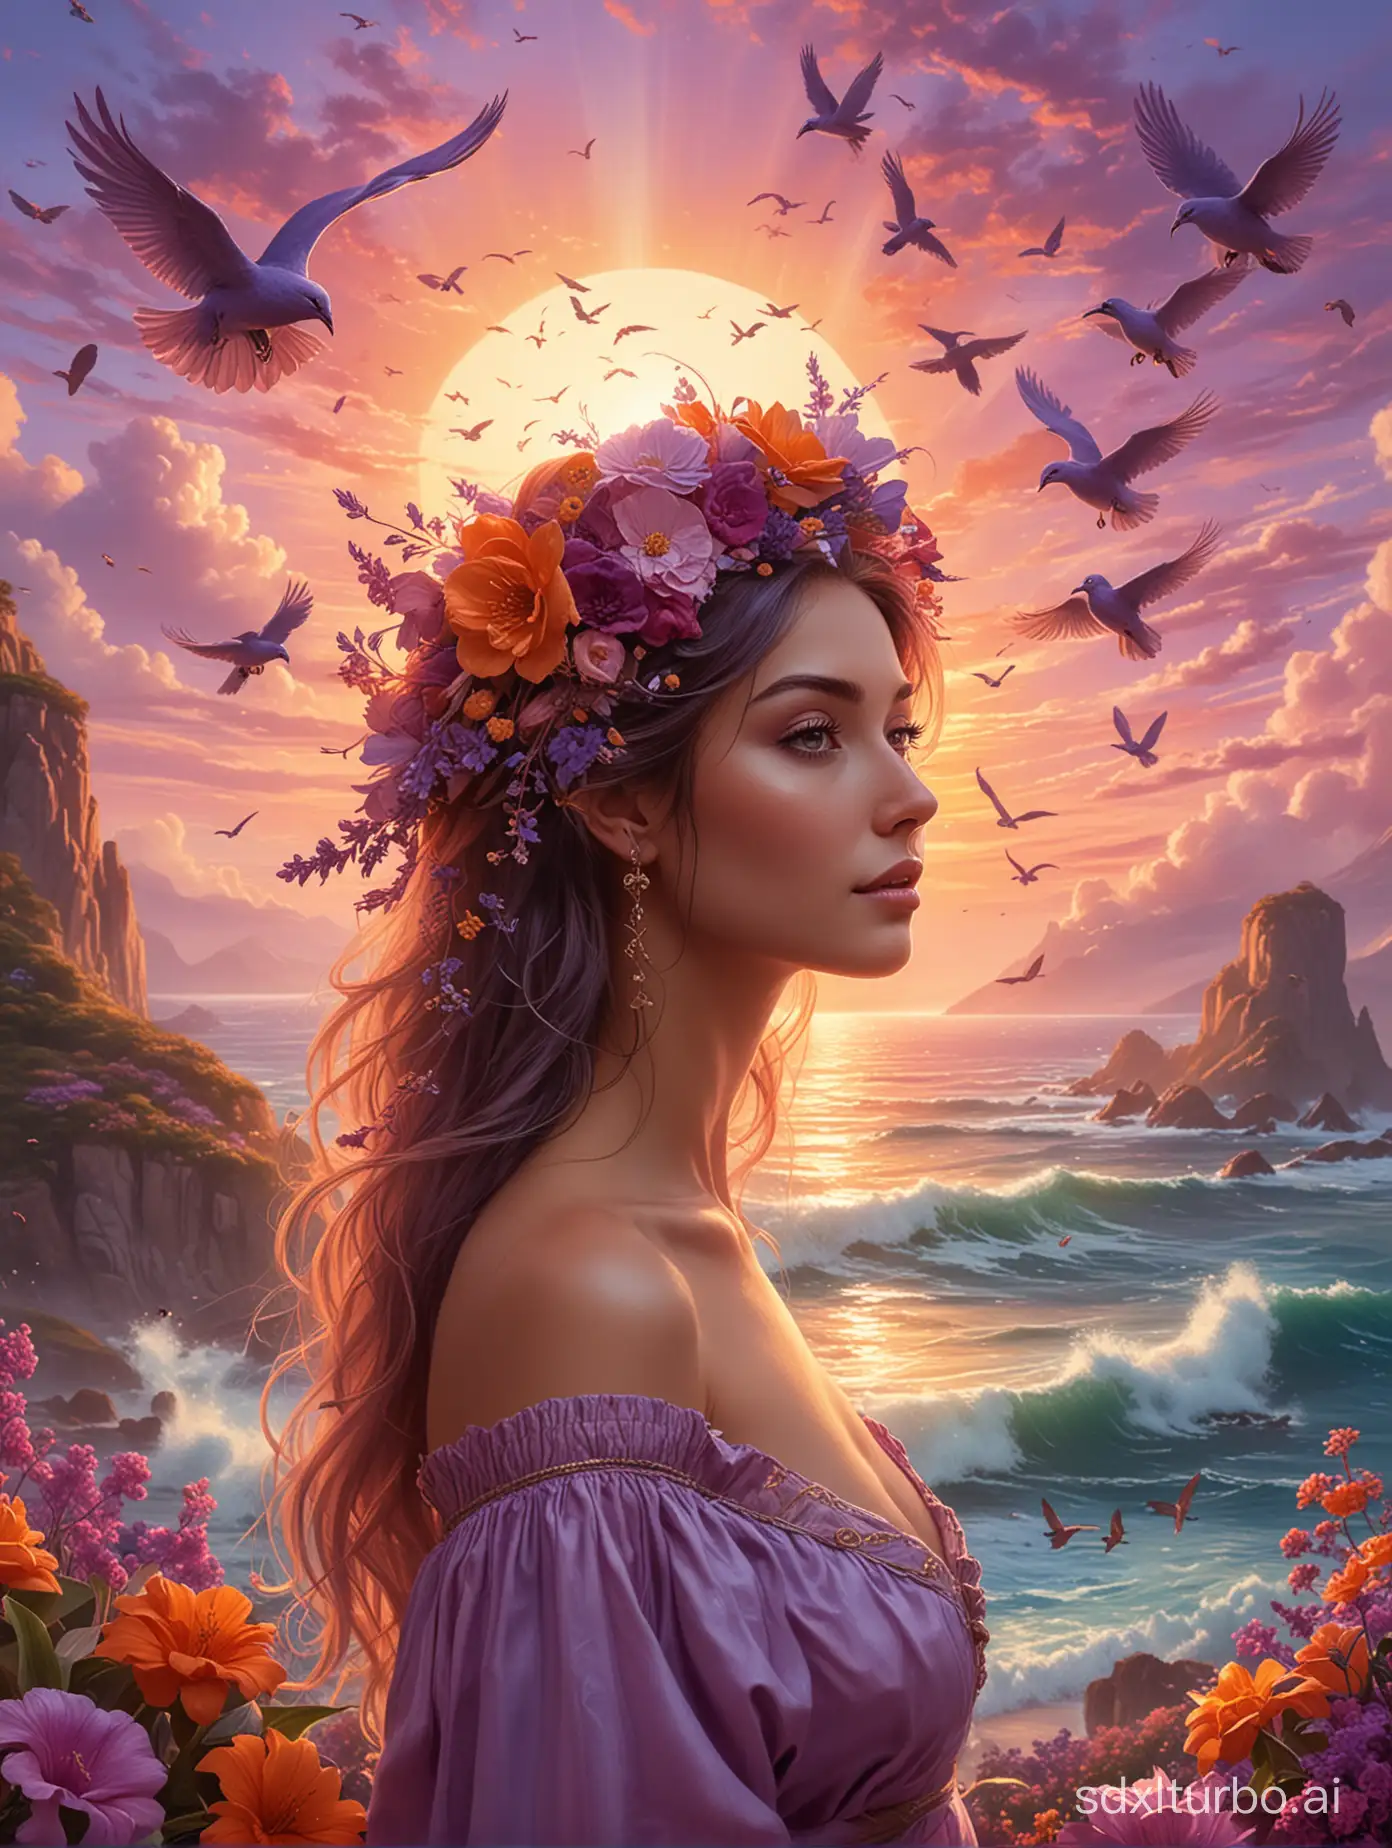 Create a fantasy-themed image of a woman with an elaborate floral arrangement in her hair. The backdrop is a vibrant sunset over a seascape. The color palette is dominated by shades of purple, pink, and warm oranges, creating an ethereal and otherworldly atmosphere. There should be a field of flowers of various types in the foreground, contributing to the dreamlike quality. Include birds in flight and small figures in the distance to add liveliness to the scene. The overall impression should be one of serenity and enchantment, as if the woman is part of a grand, magical world.